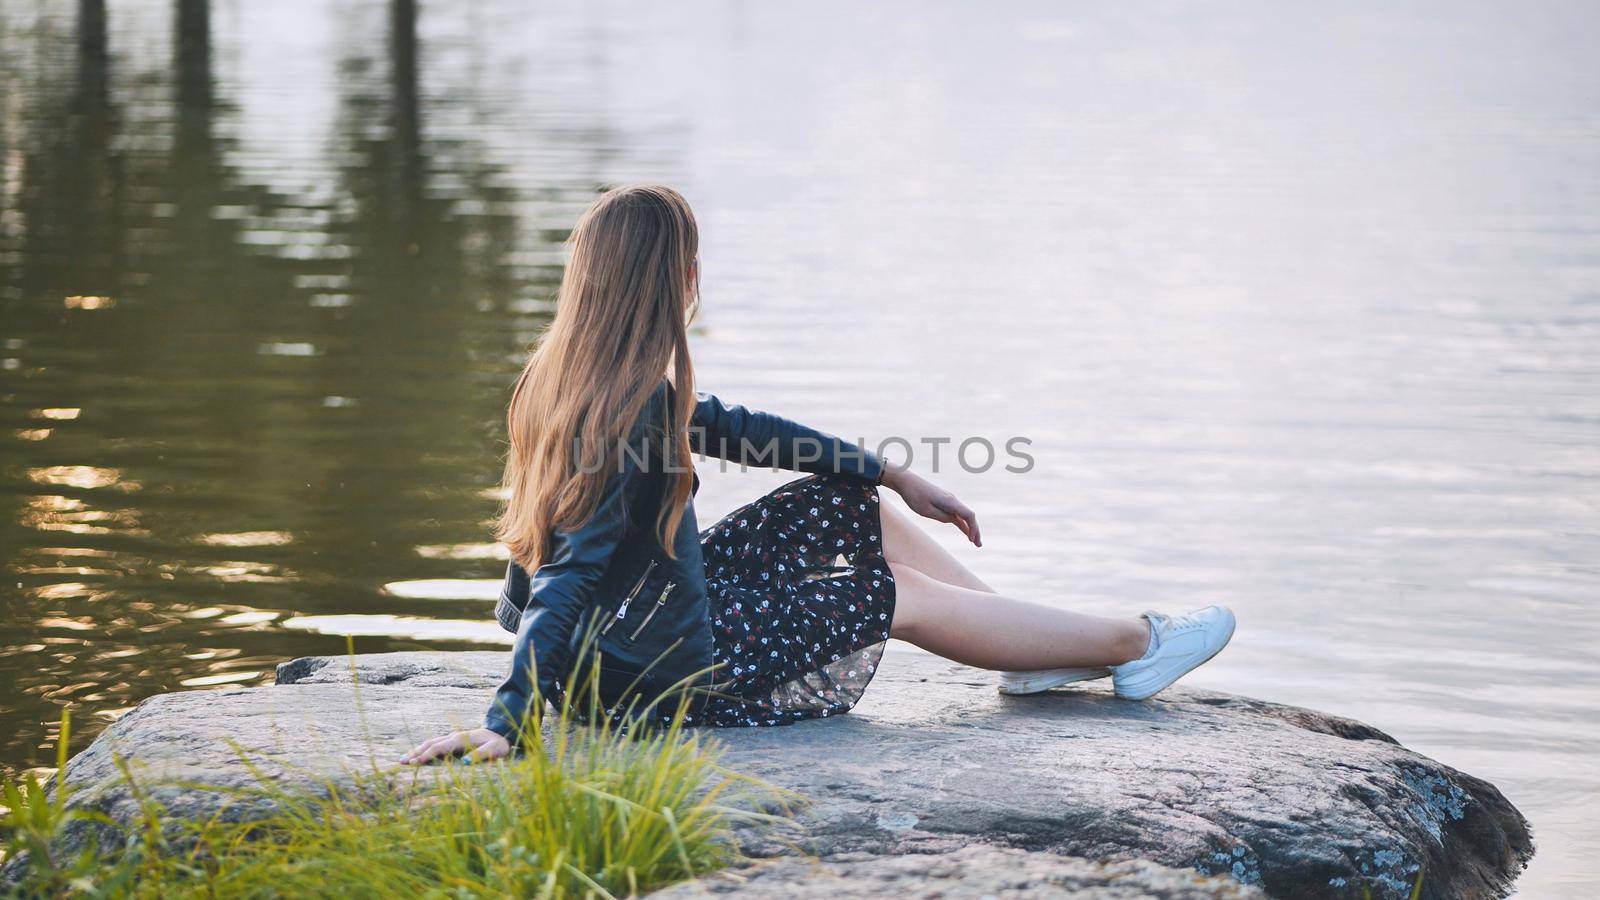 A girl sits by the lake on a rock